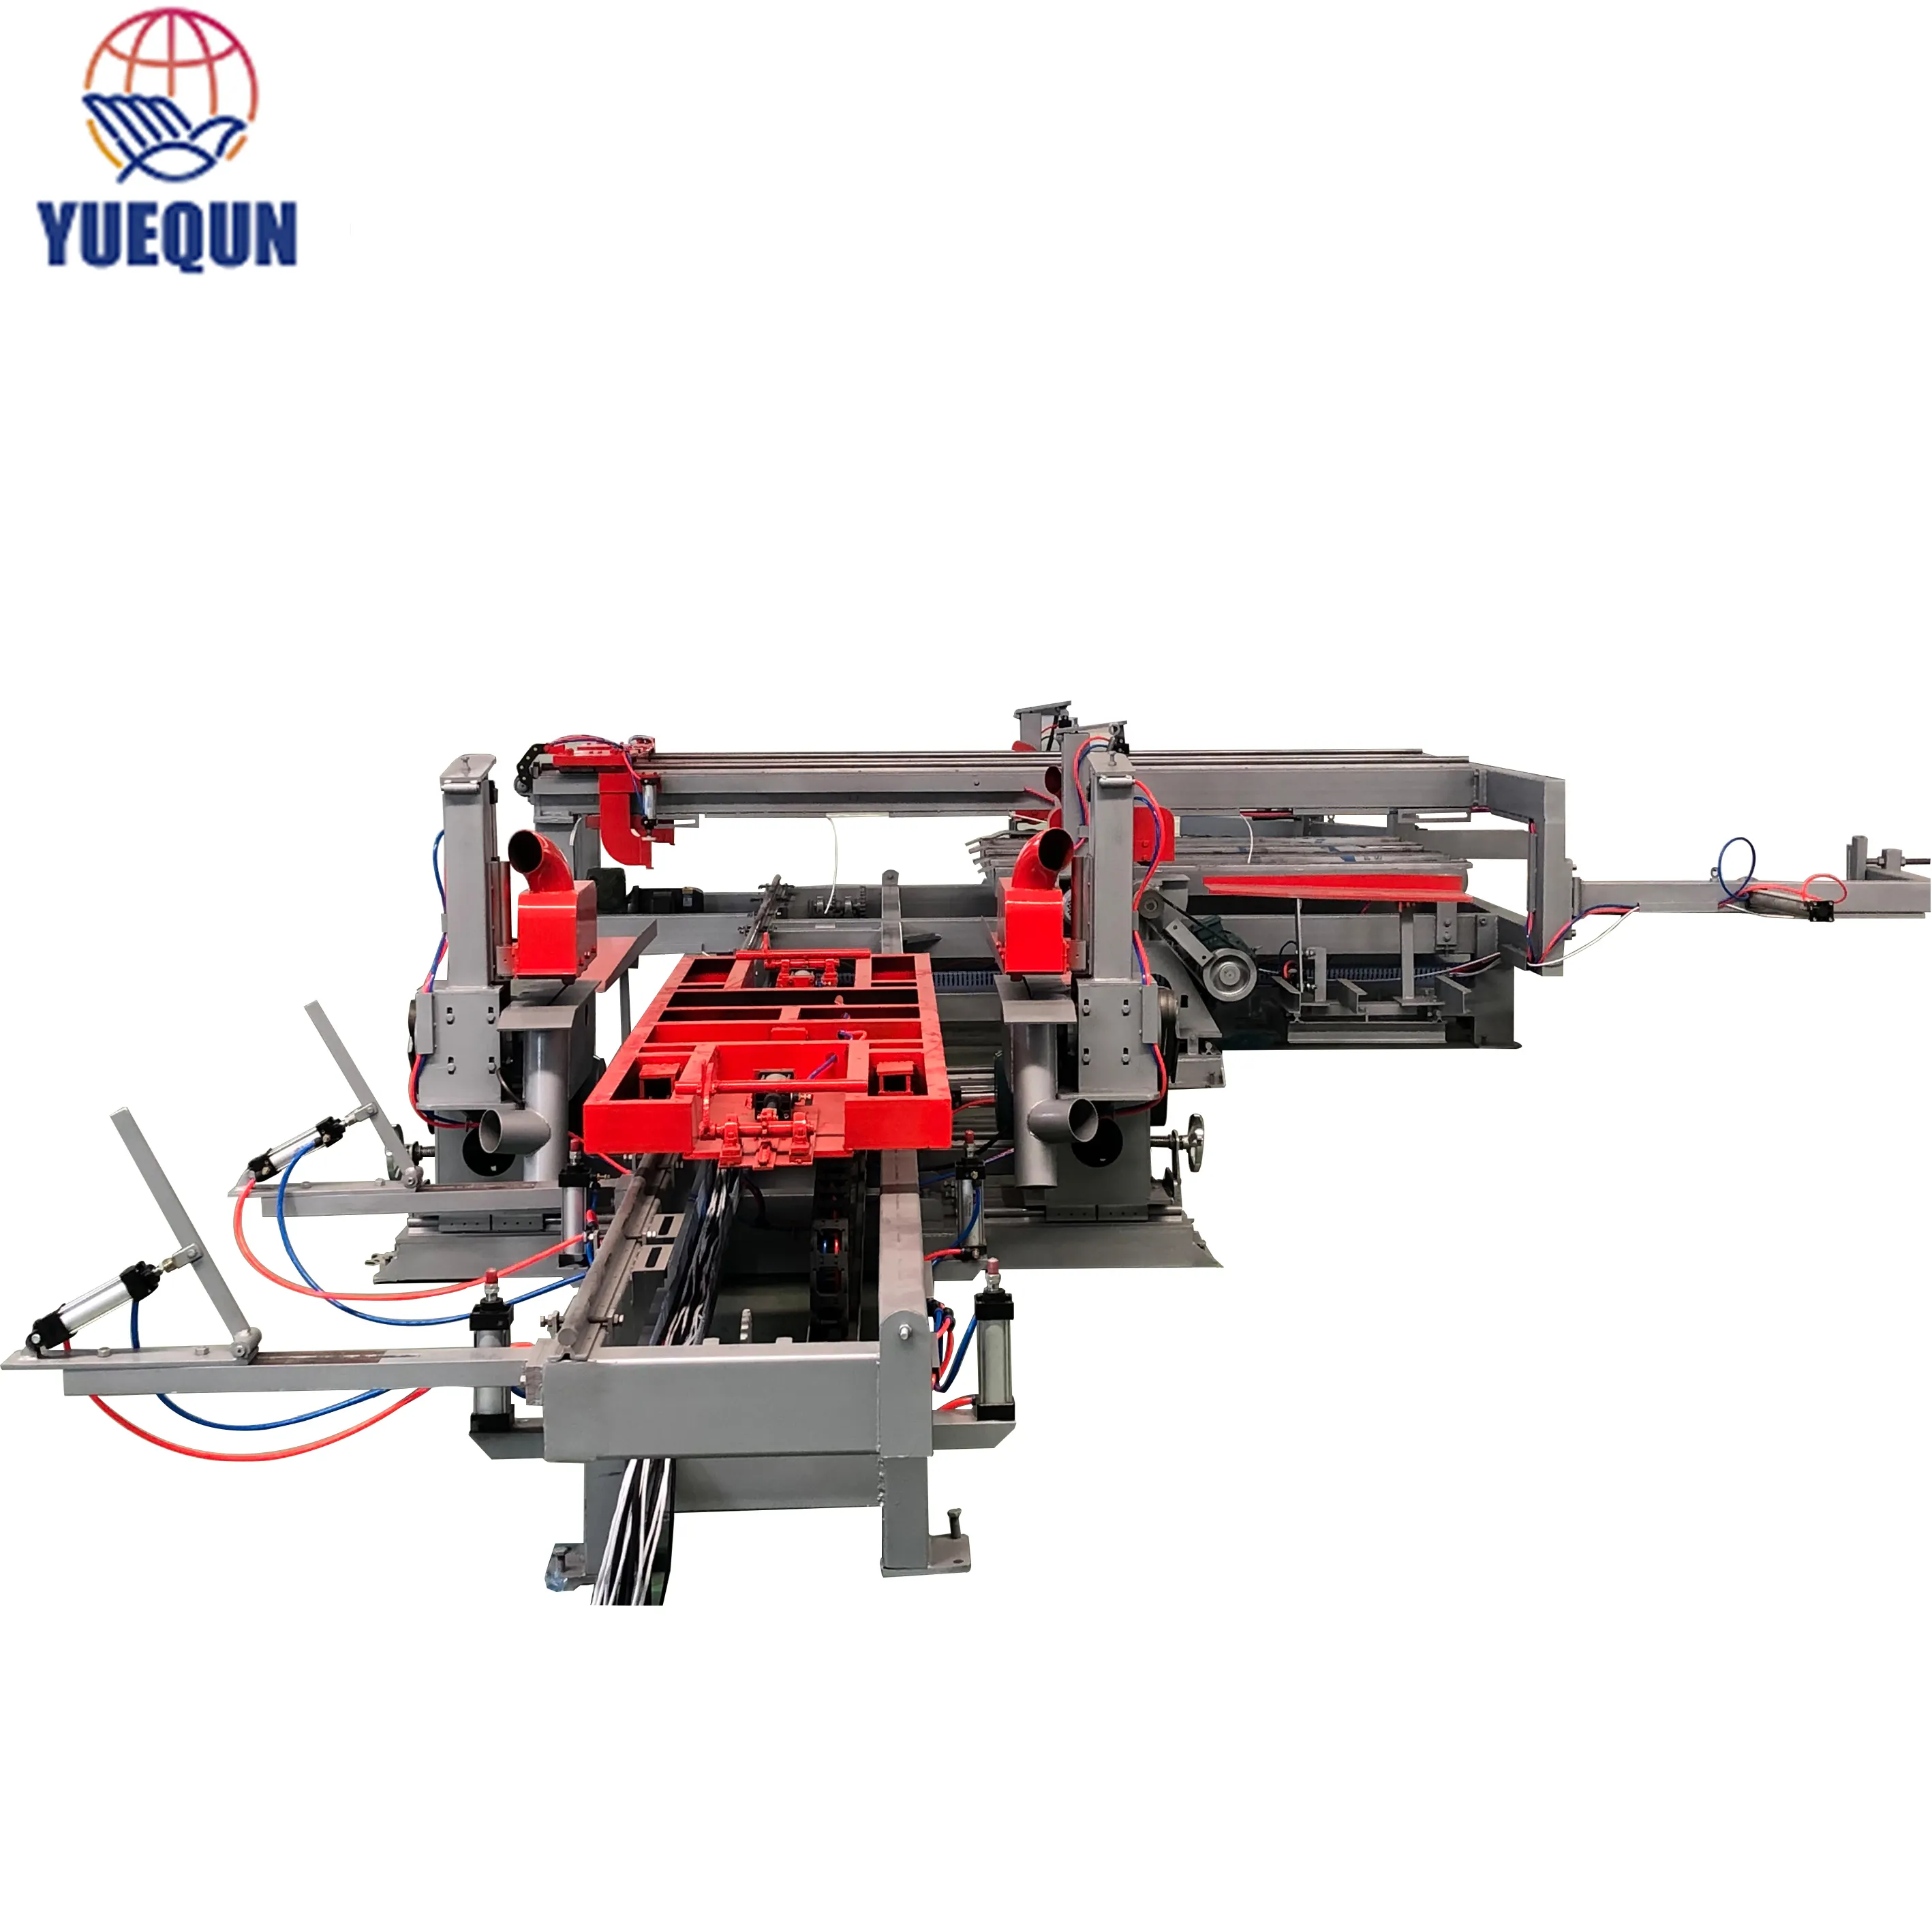 Yuequn Brand Woodworking Saw Machine Plywood Edge Cutting Machine at Price for Plywood Industries